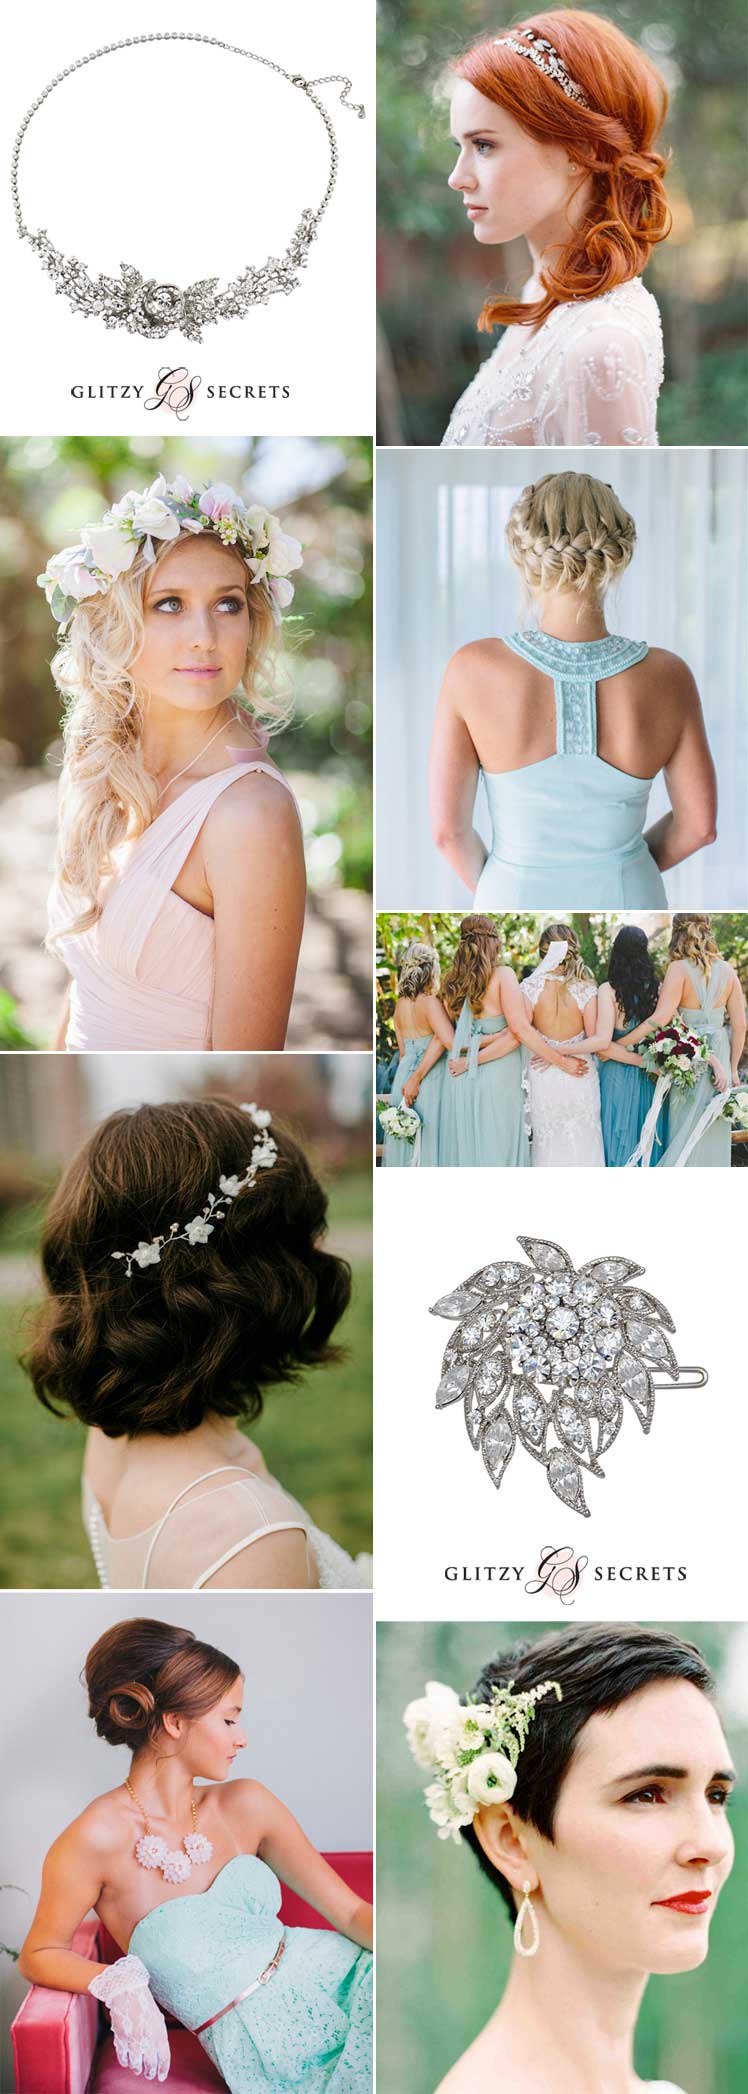 Inspiration for your bridemaids' hairstyles